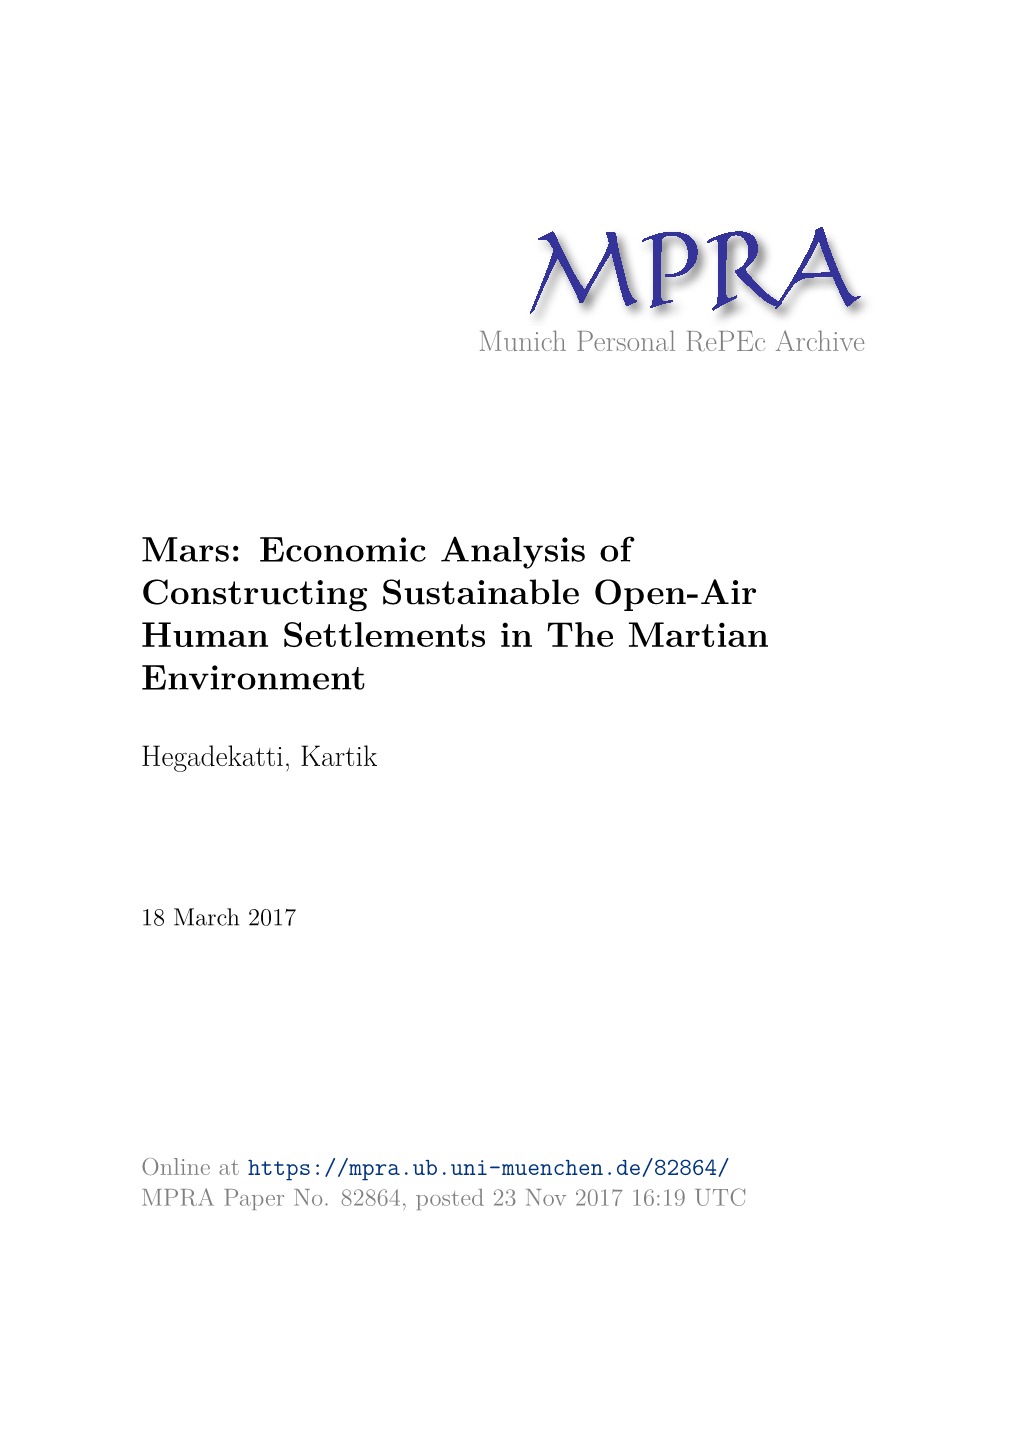 Mars: Economic Analysis of Constructing Sustainable Open-Air Human Settlements in the Martian Environment